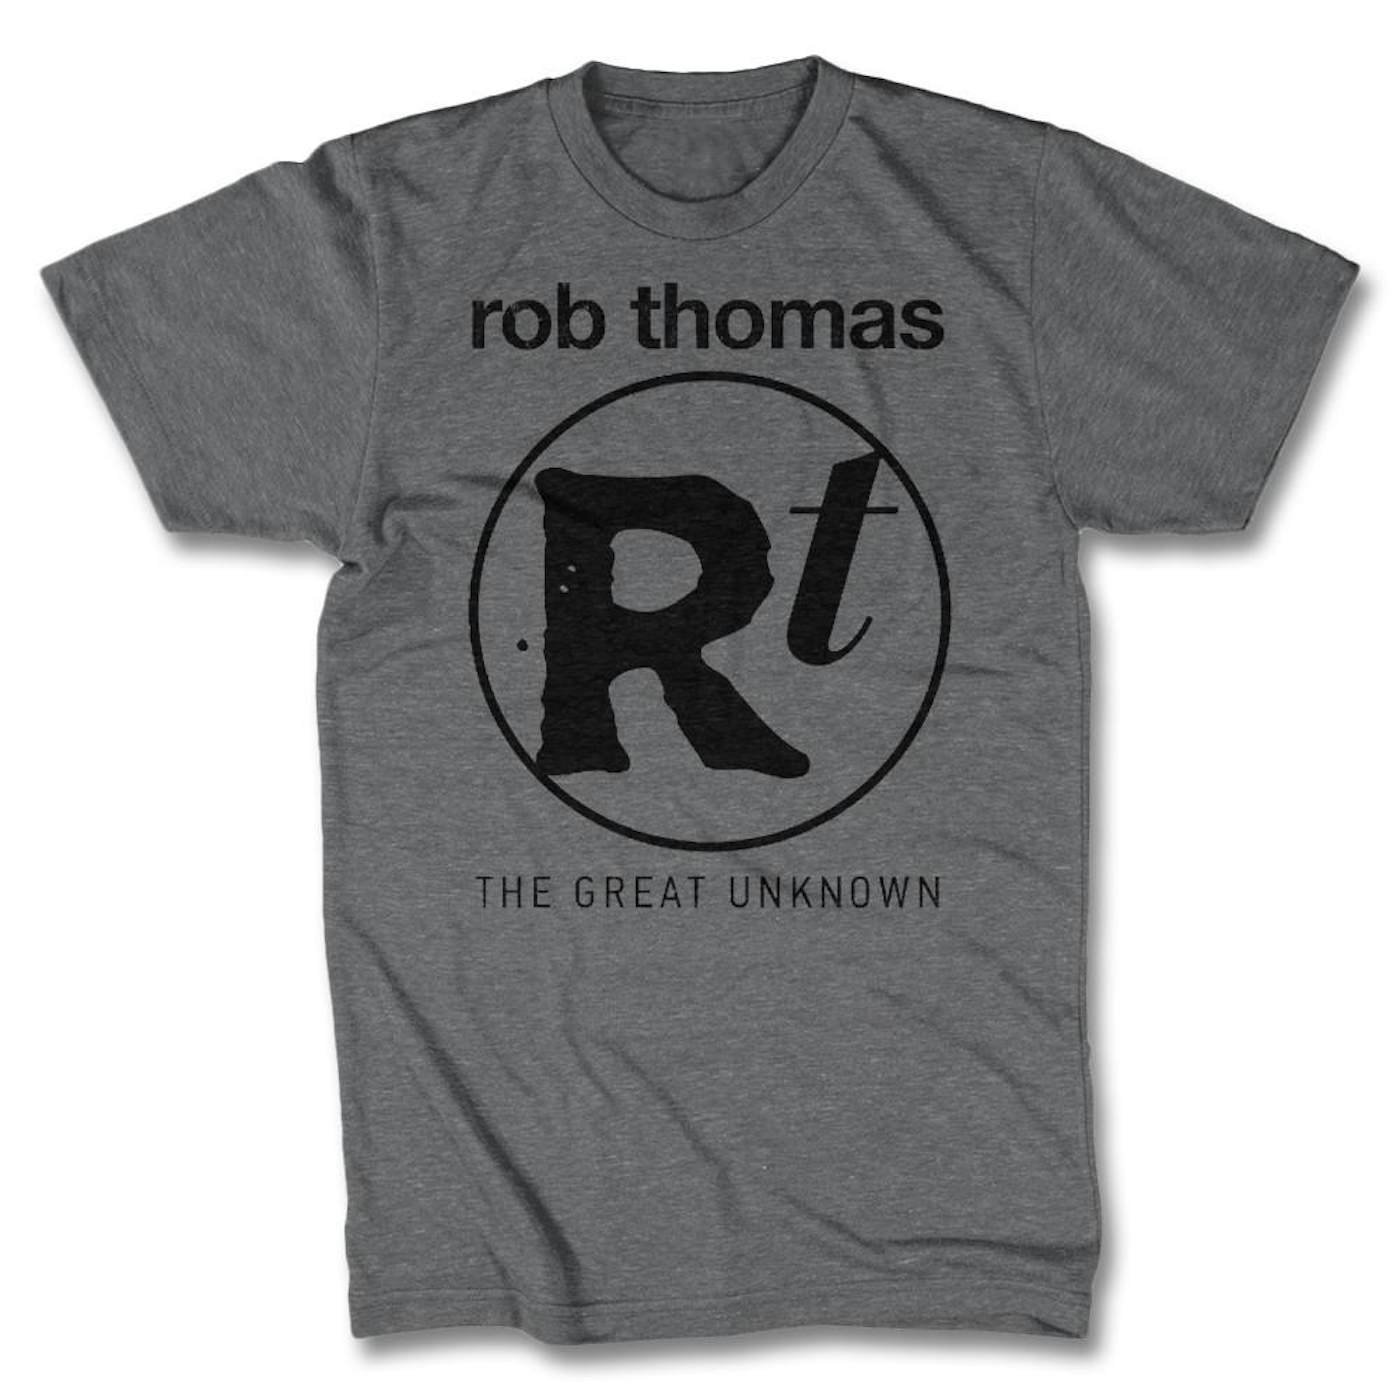 Rob Thomas The Great Unknown T-shirt - Men's